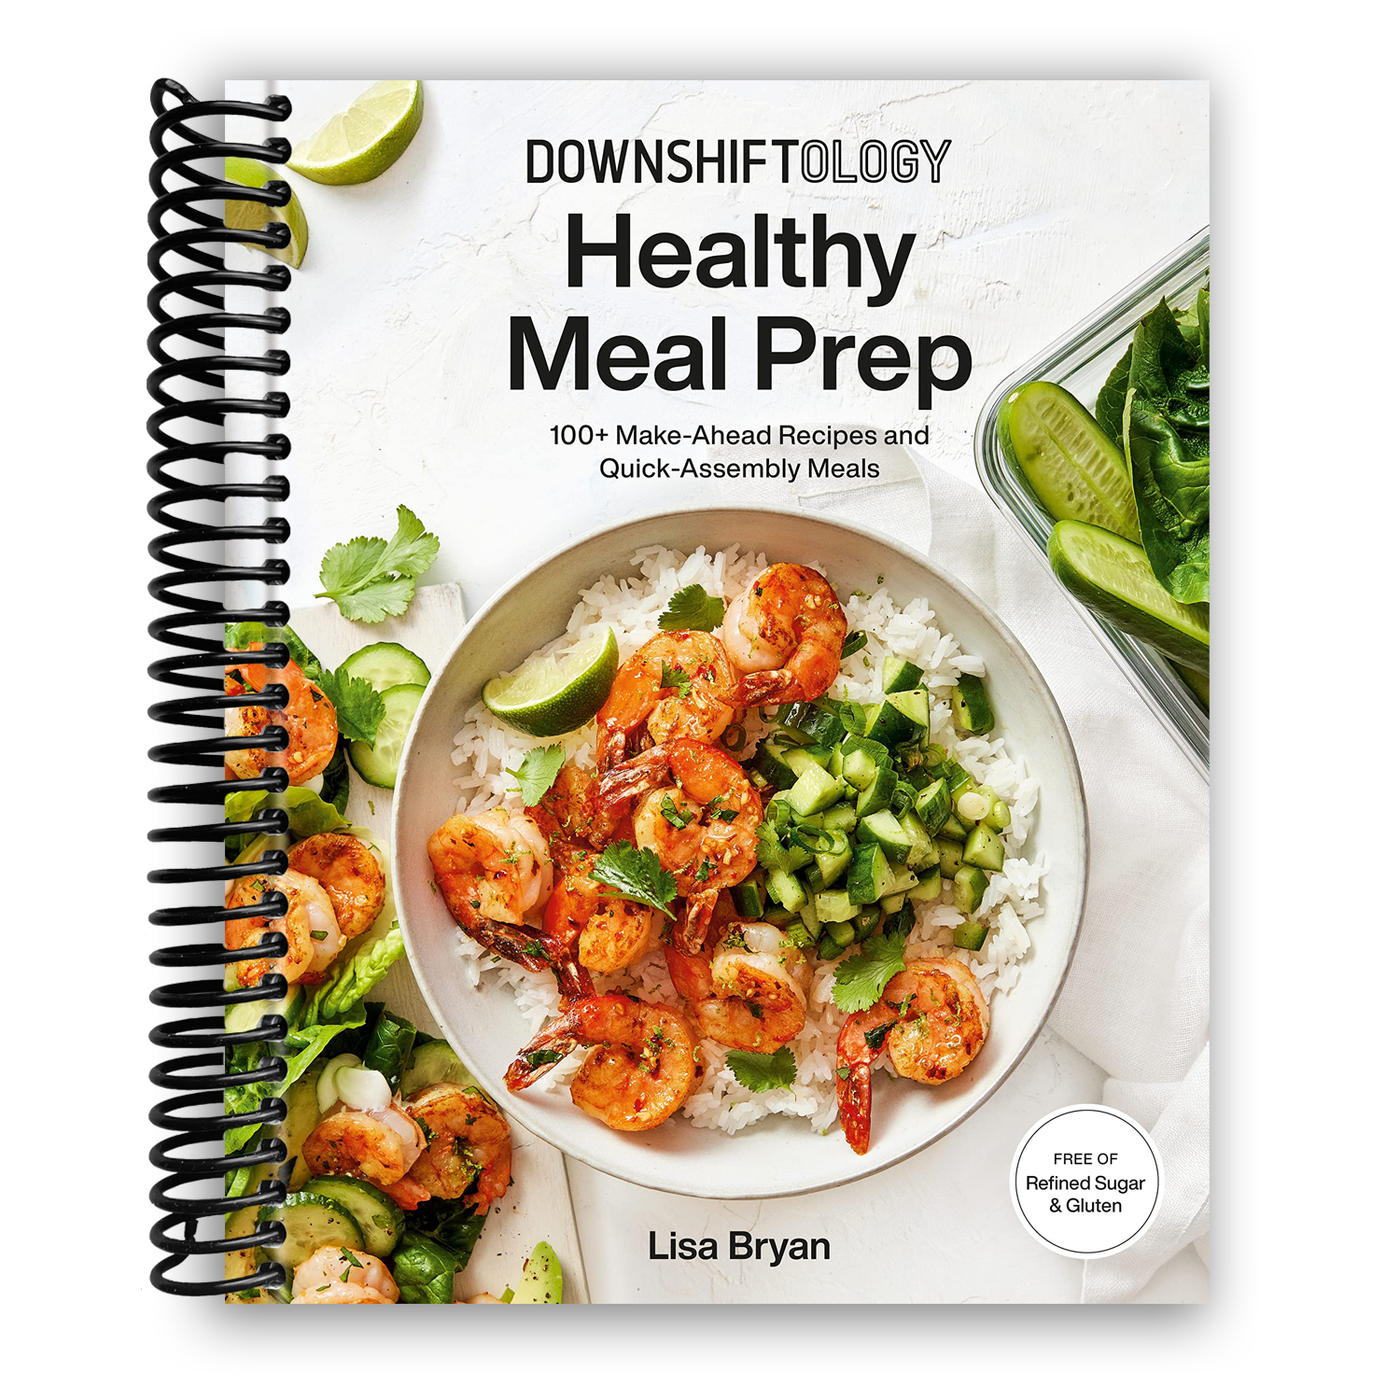 Downshiftology Healthy Meal Prep: 100+ Make-Ahead Recipes and Quick-Assembly Meals (Spiral Bound)